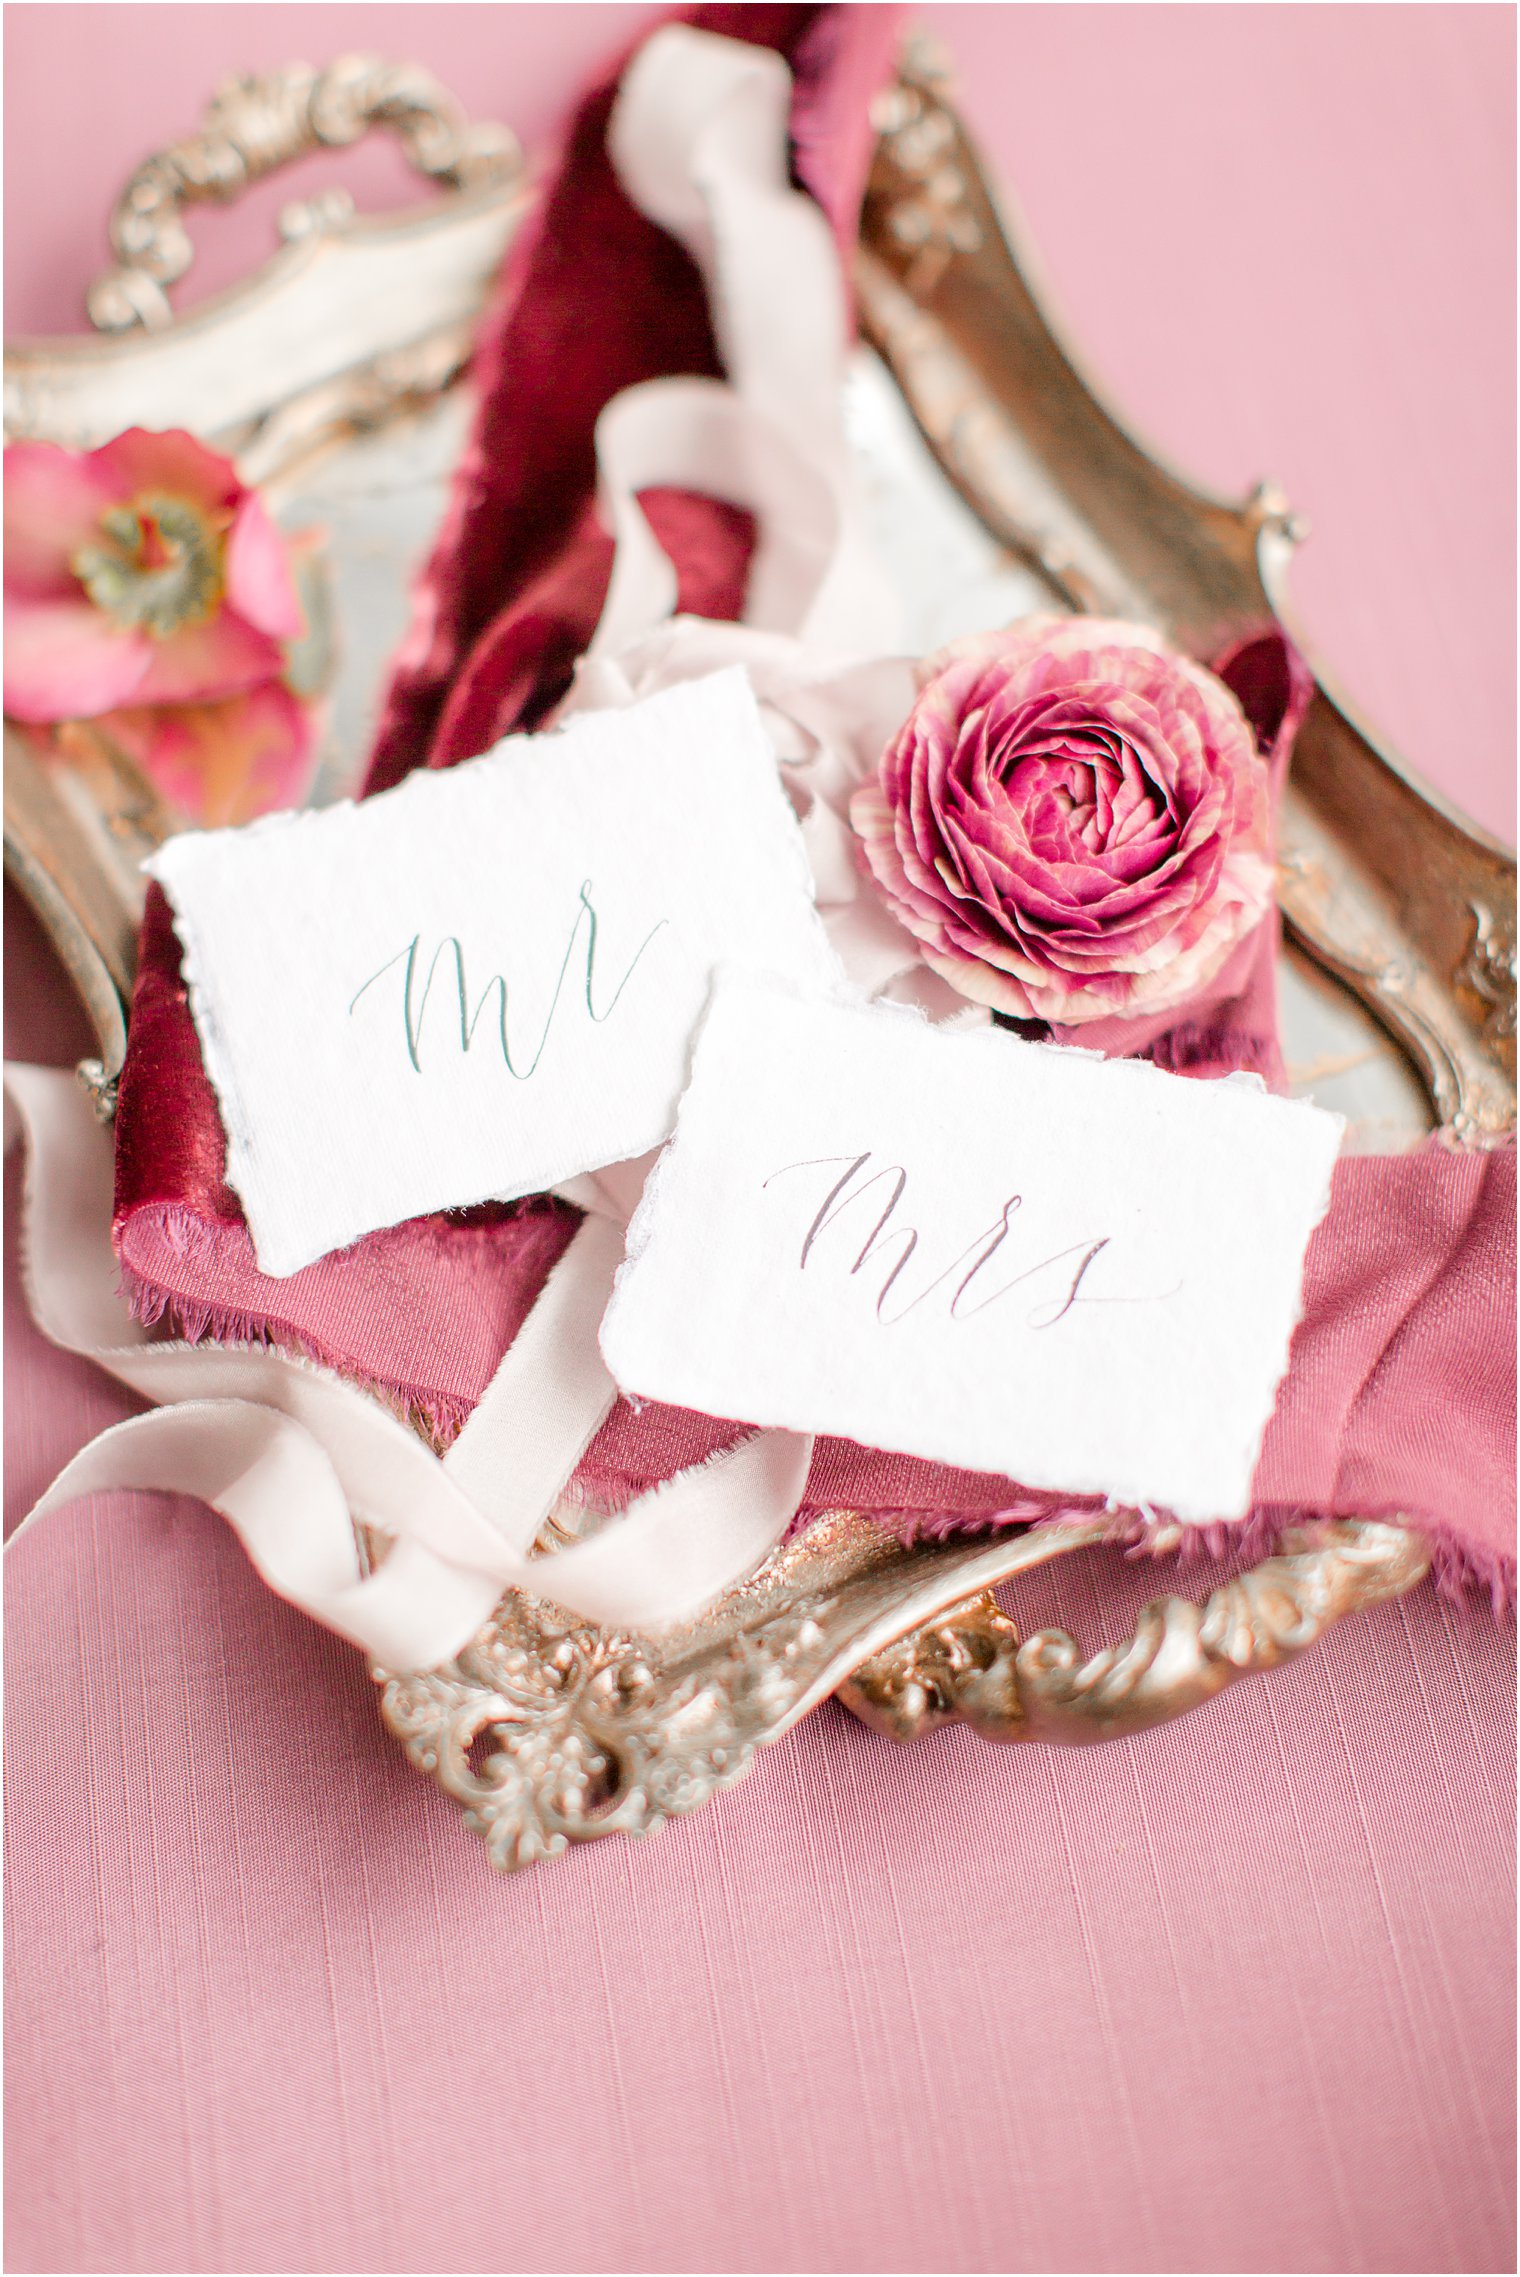 Mr and Mrs seating cards with calligraphy